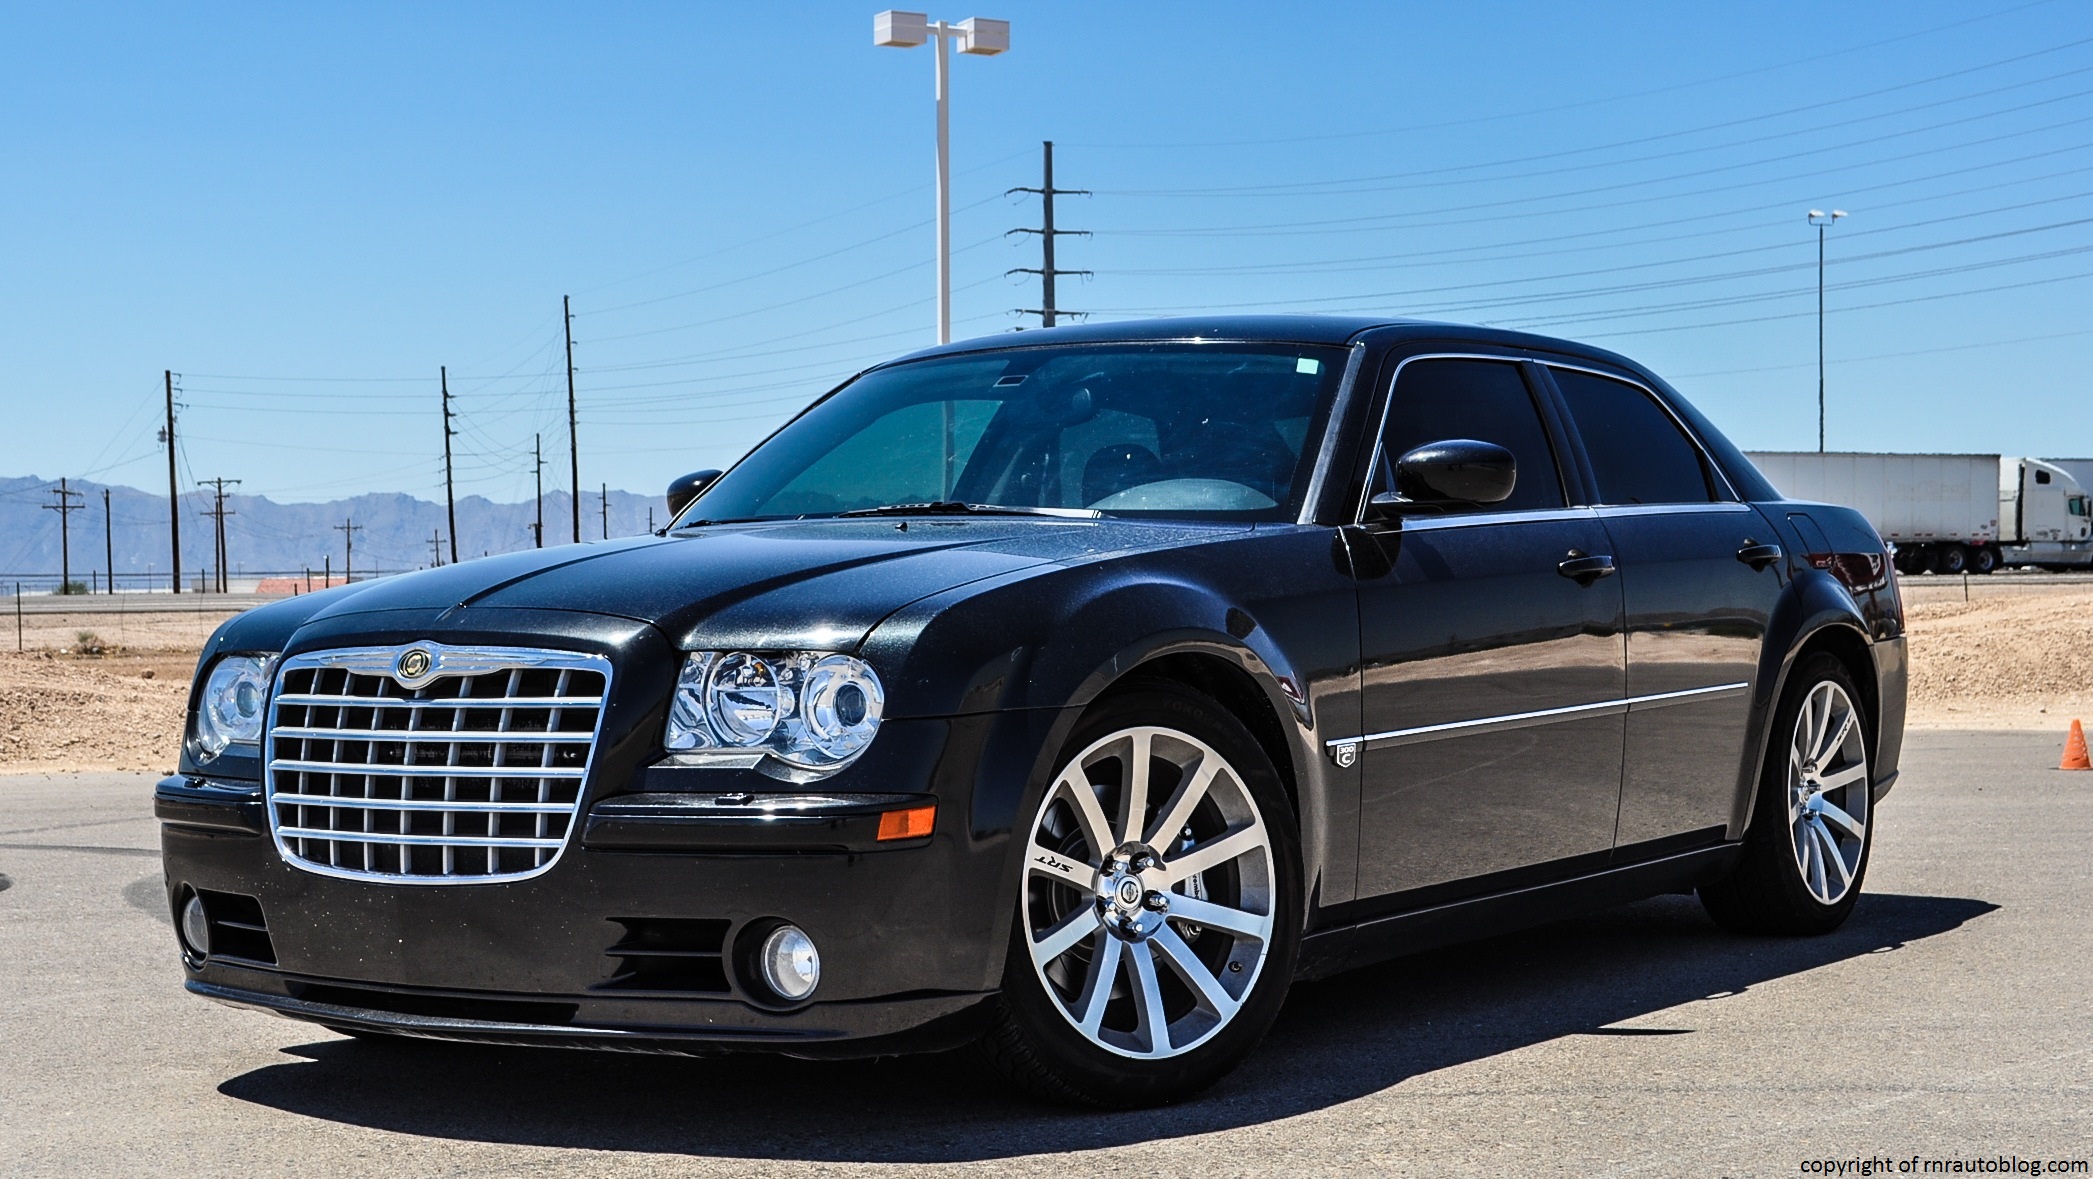 Amazing Chrysler 300 Pictures & Backgrounds